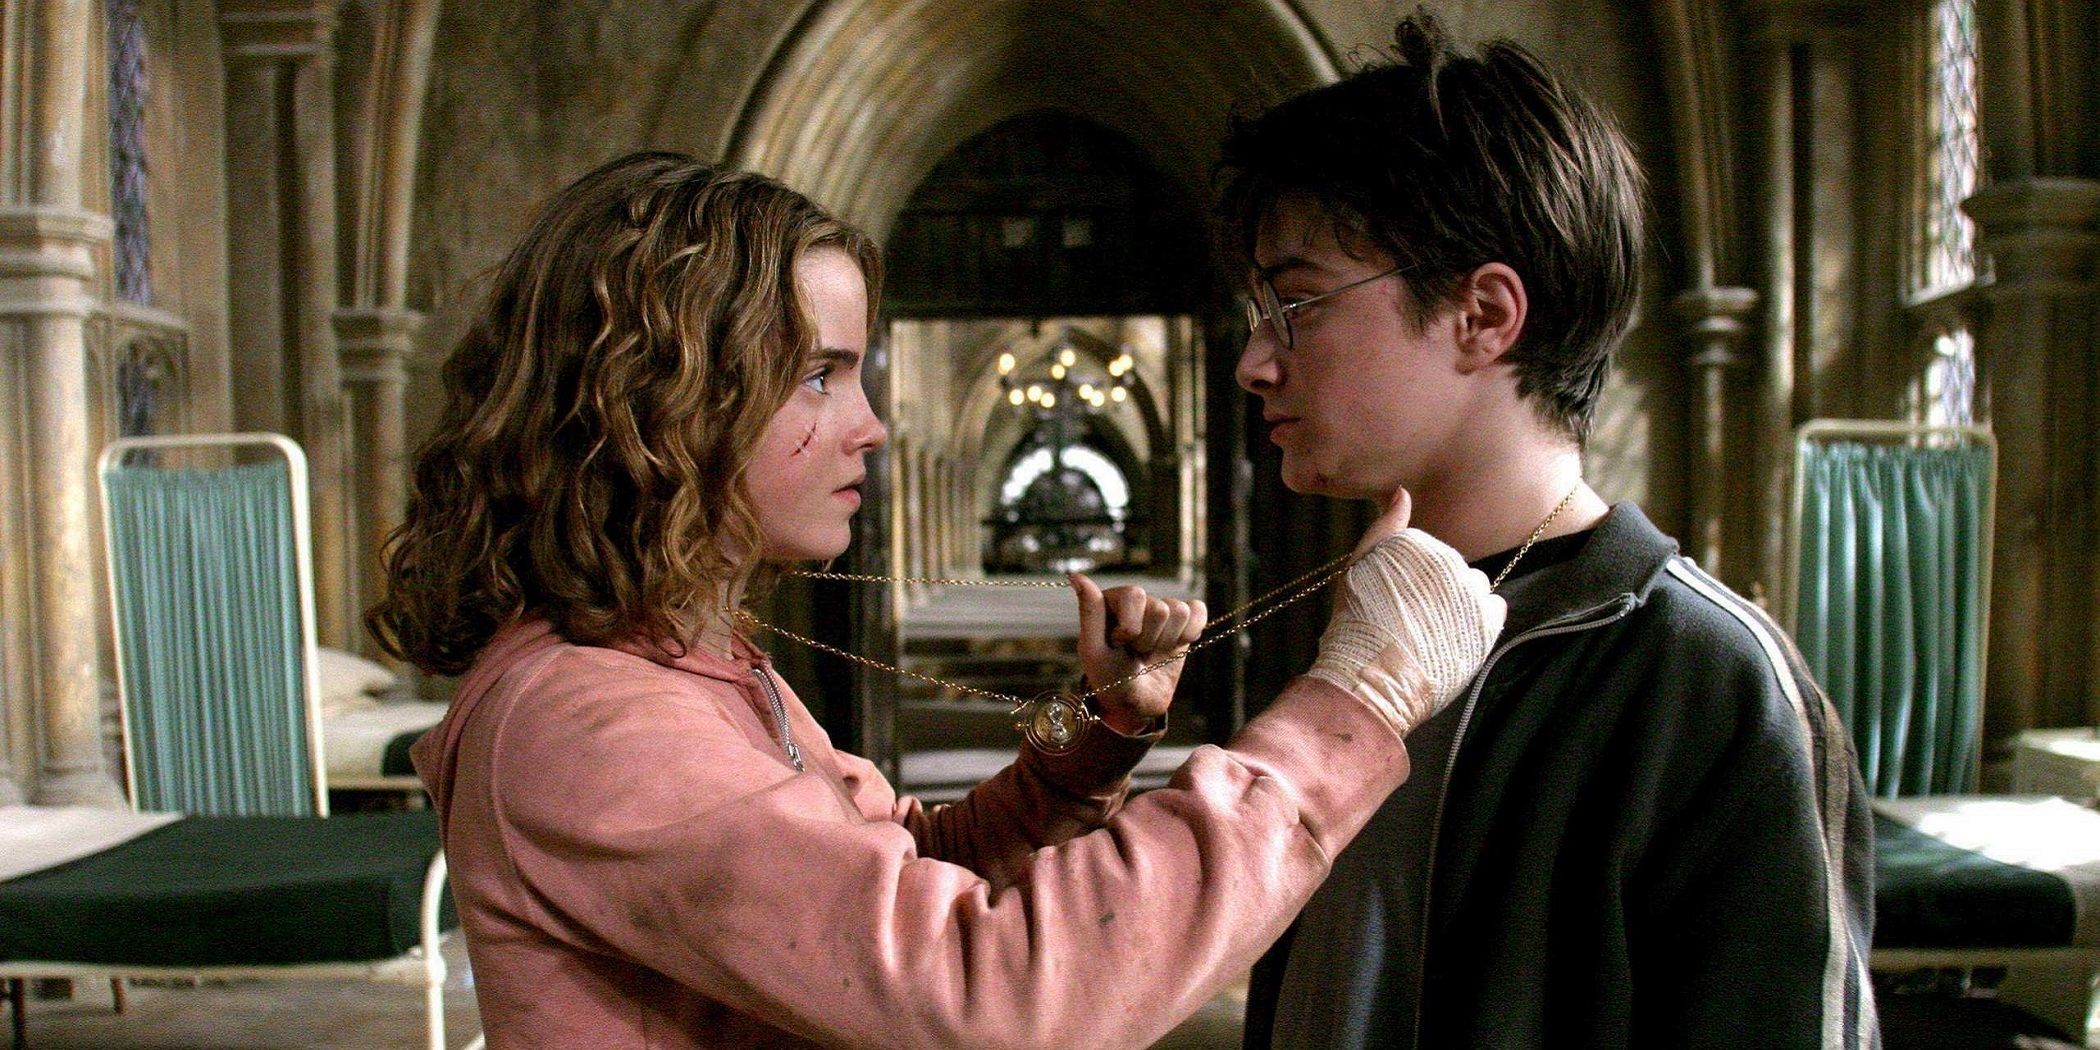 10 Of The Worst Things That Ever Happened In Hogwarts (Besides Voldemort)